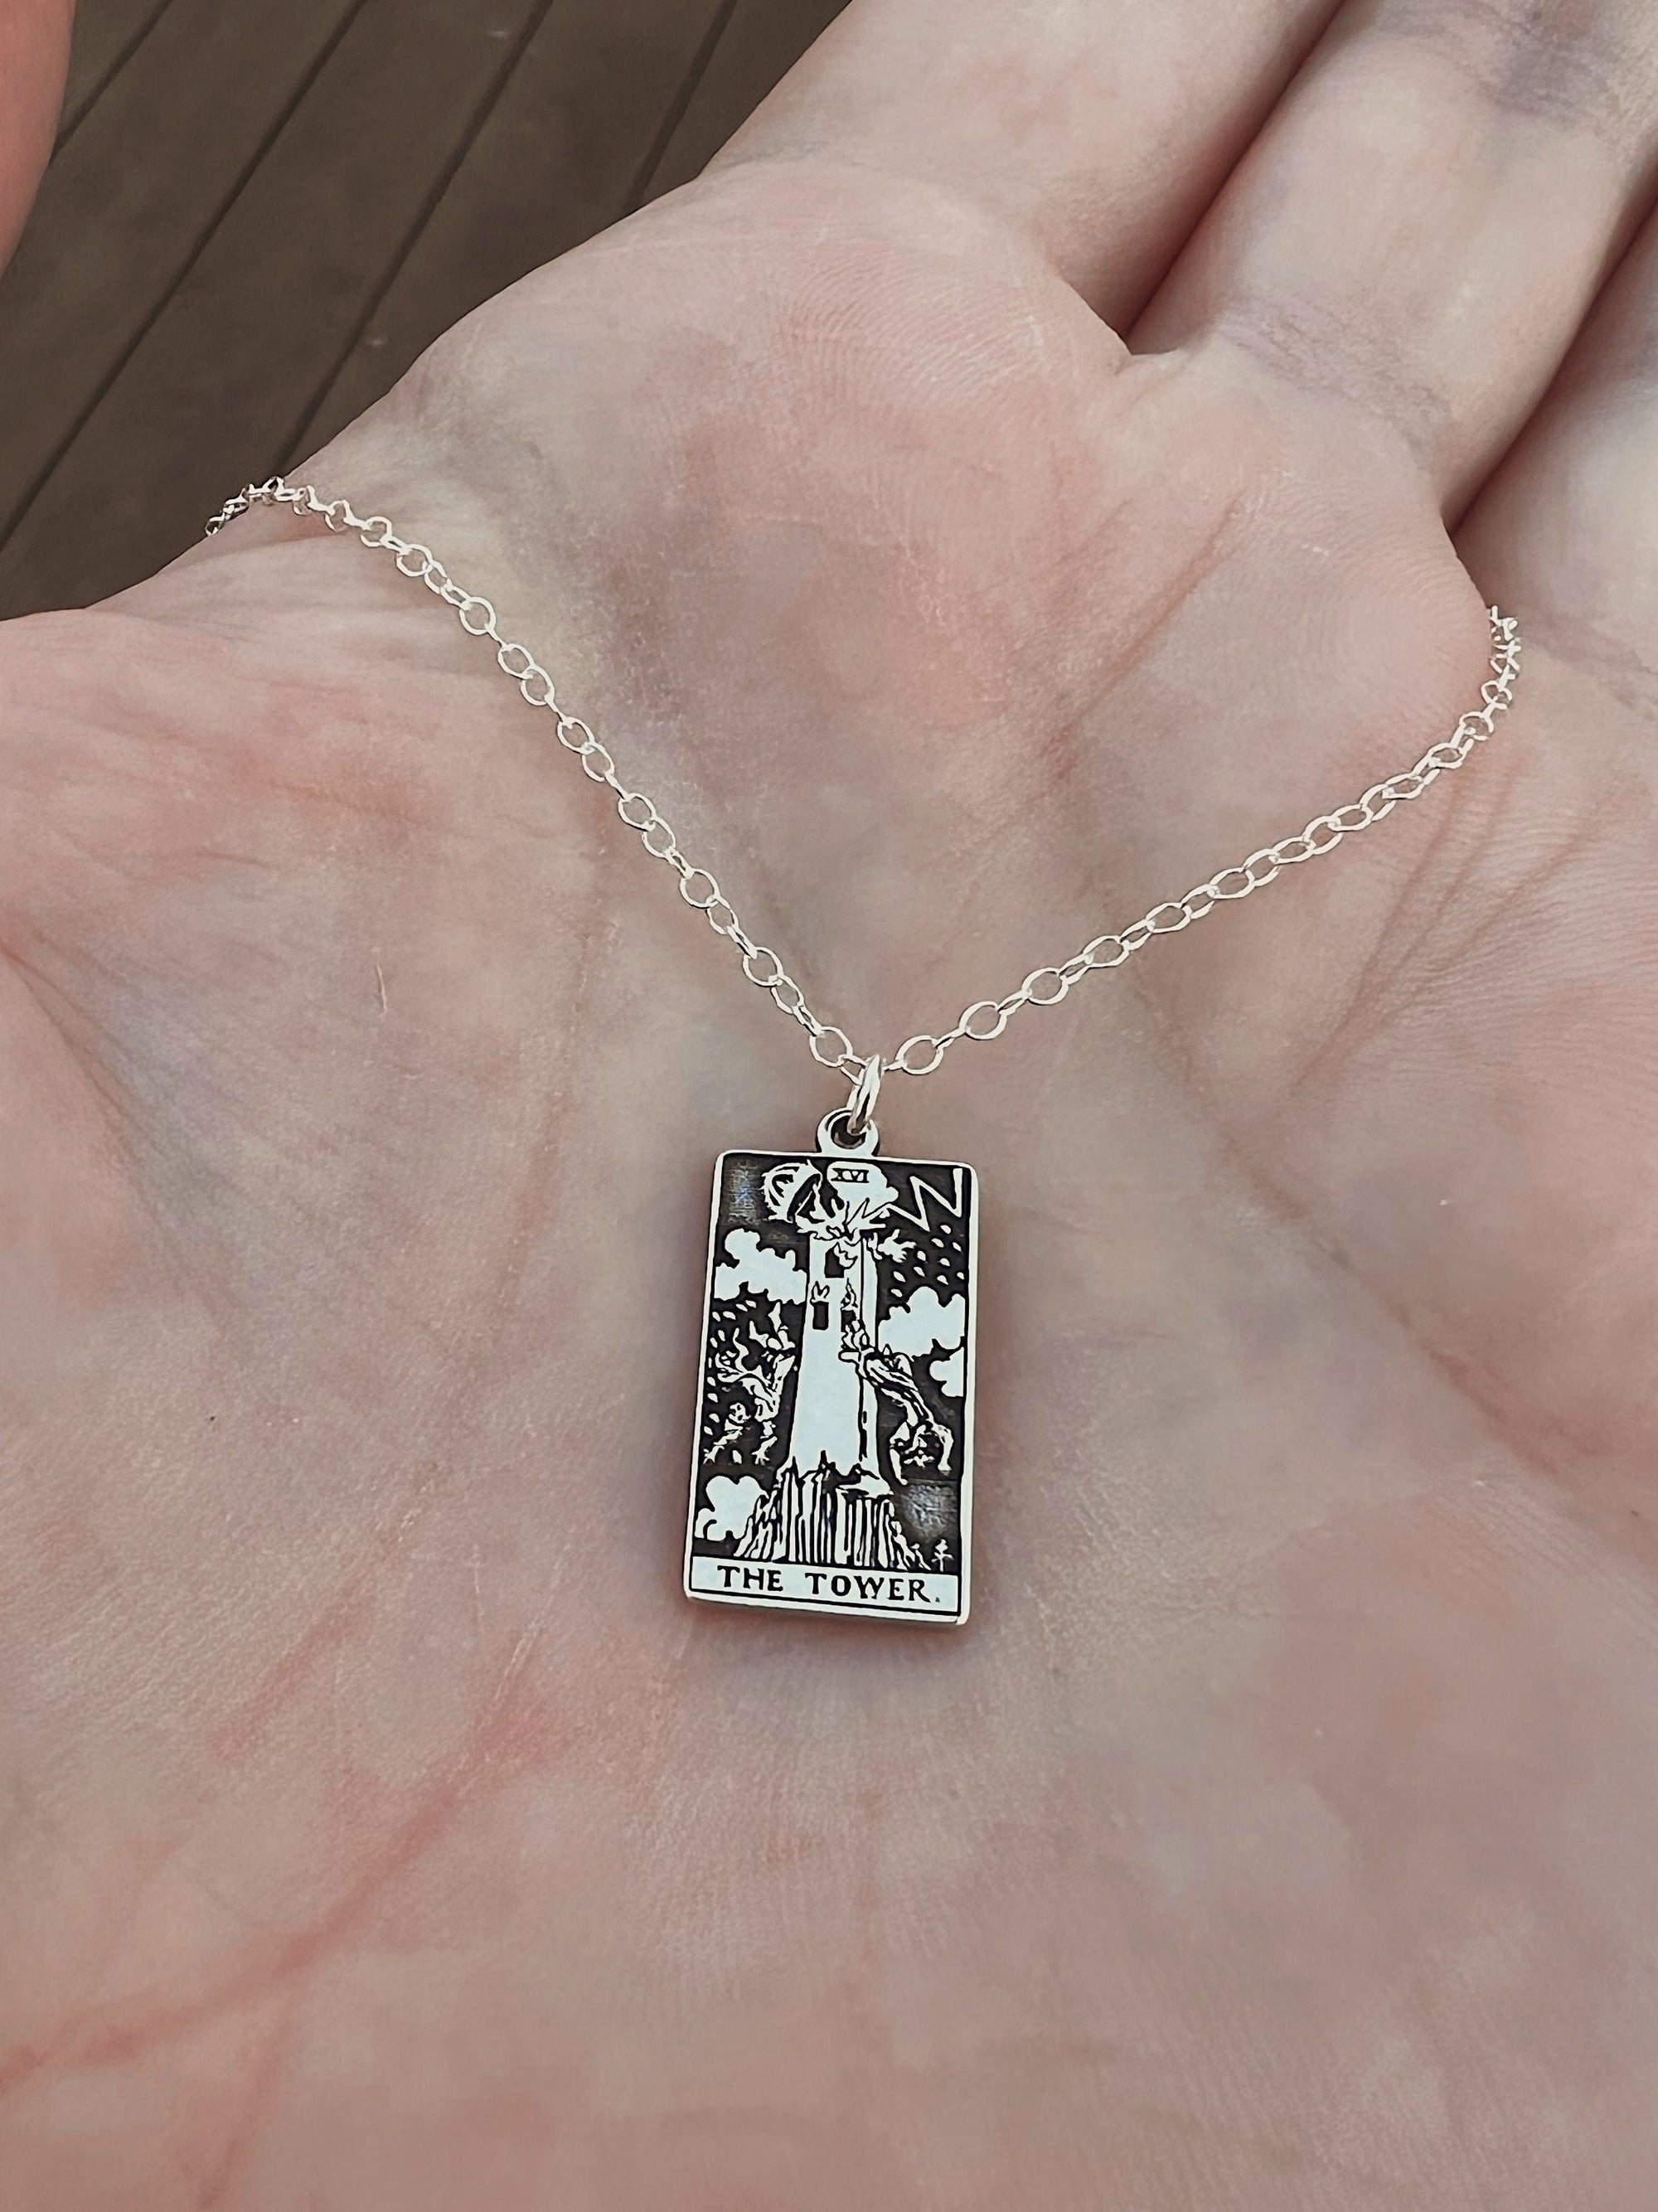 The Tower Tarot Card Necklace - Sterling Silver